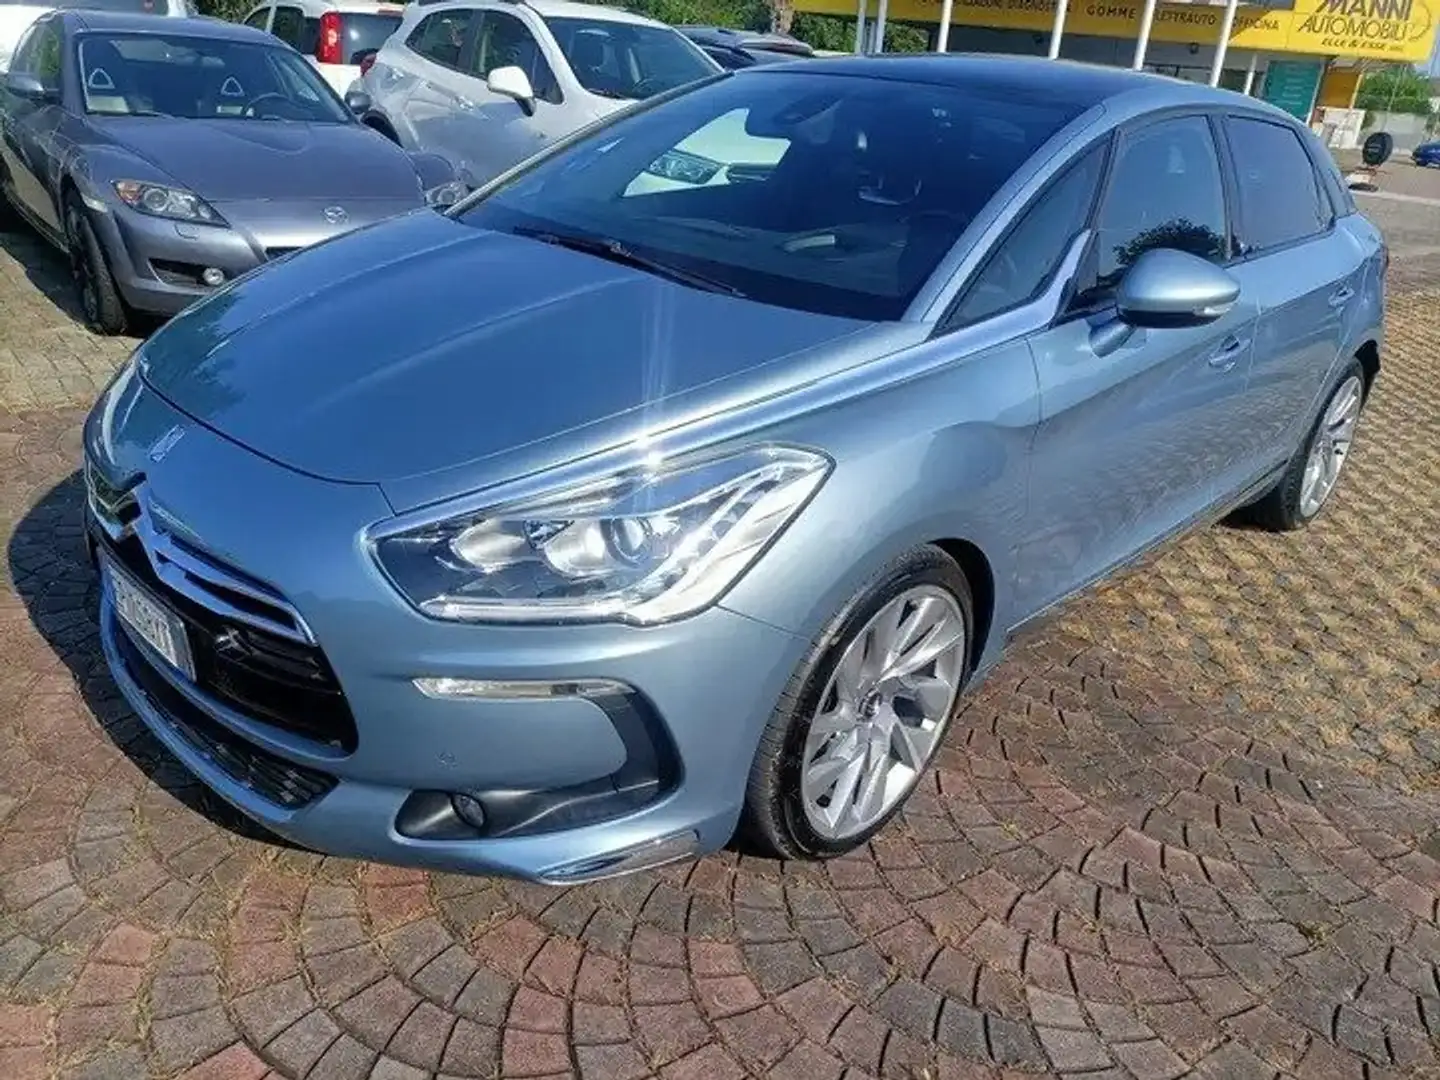 Citroen DS5 DS5 2.0 hdi So Chic 160cv -EP258YT Blue - 2